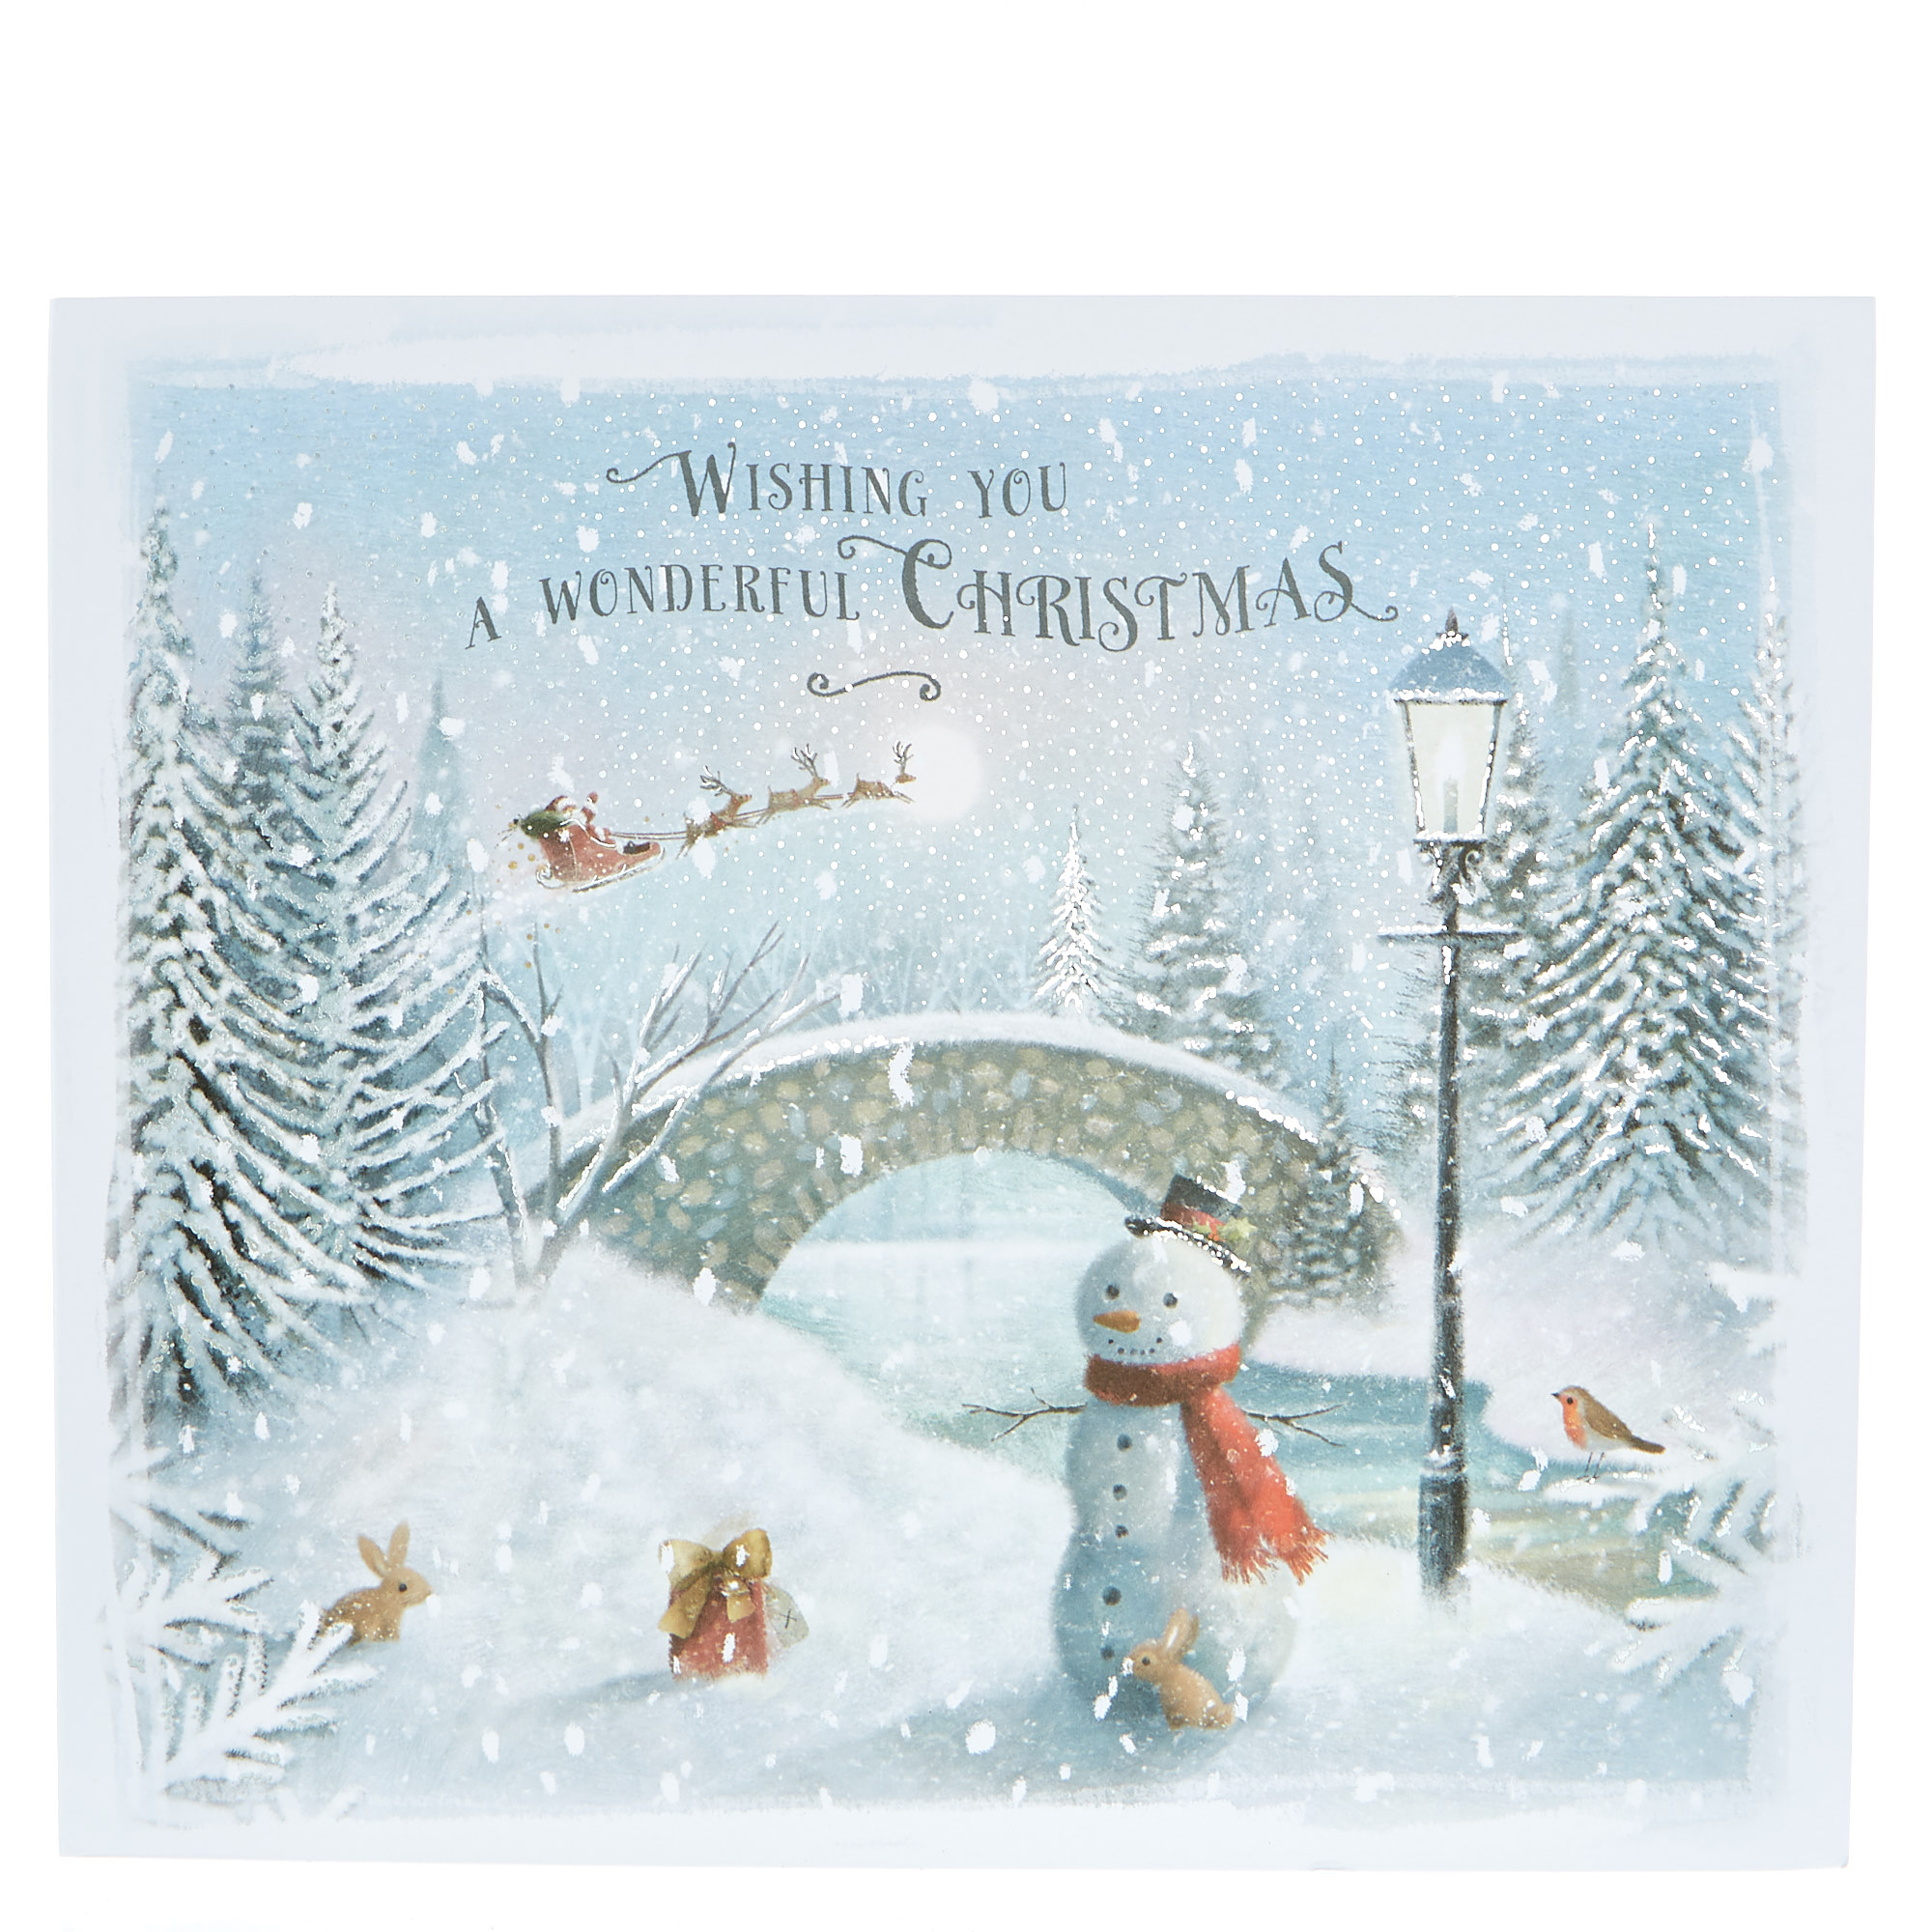 Box of 12 Deluxe Night's Sky Charity Christmas Cards - 2 Designs 